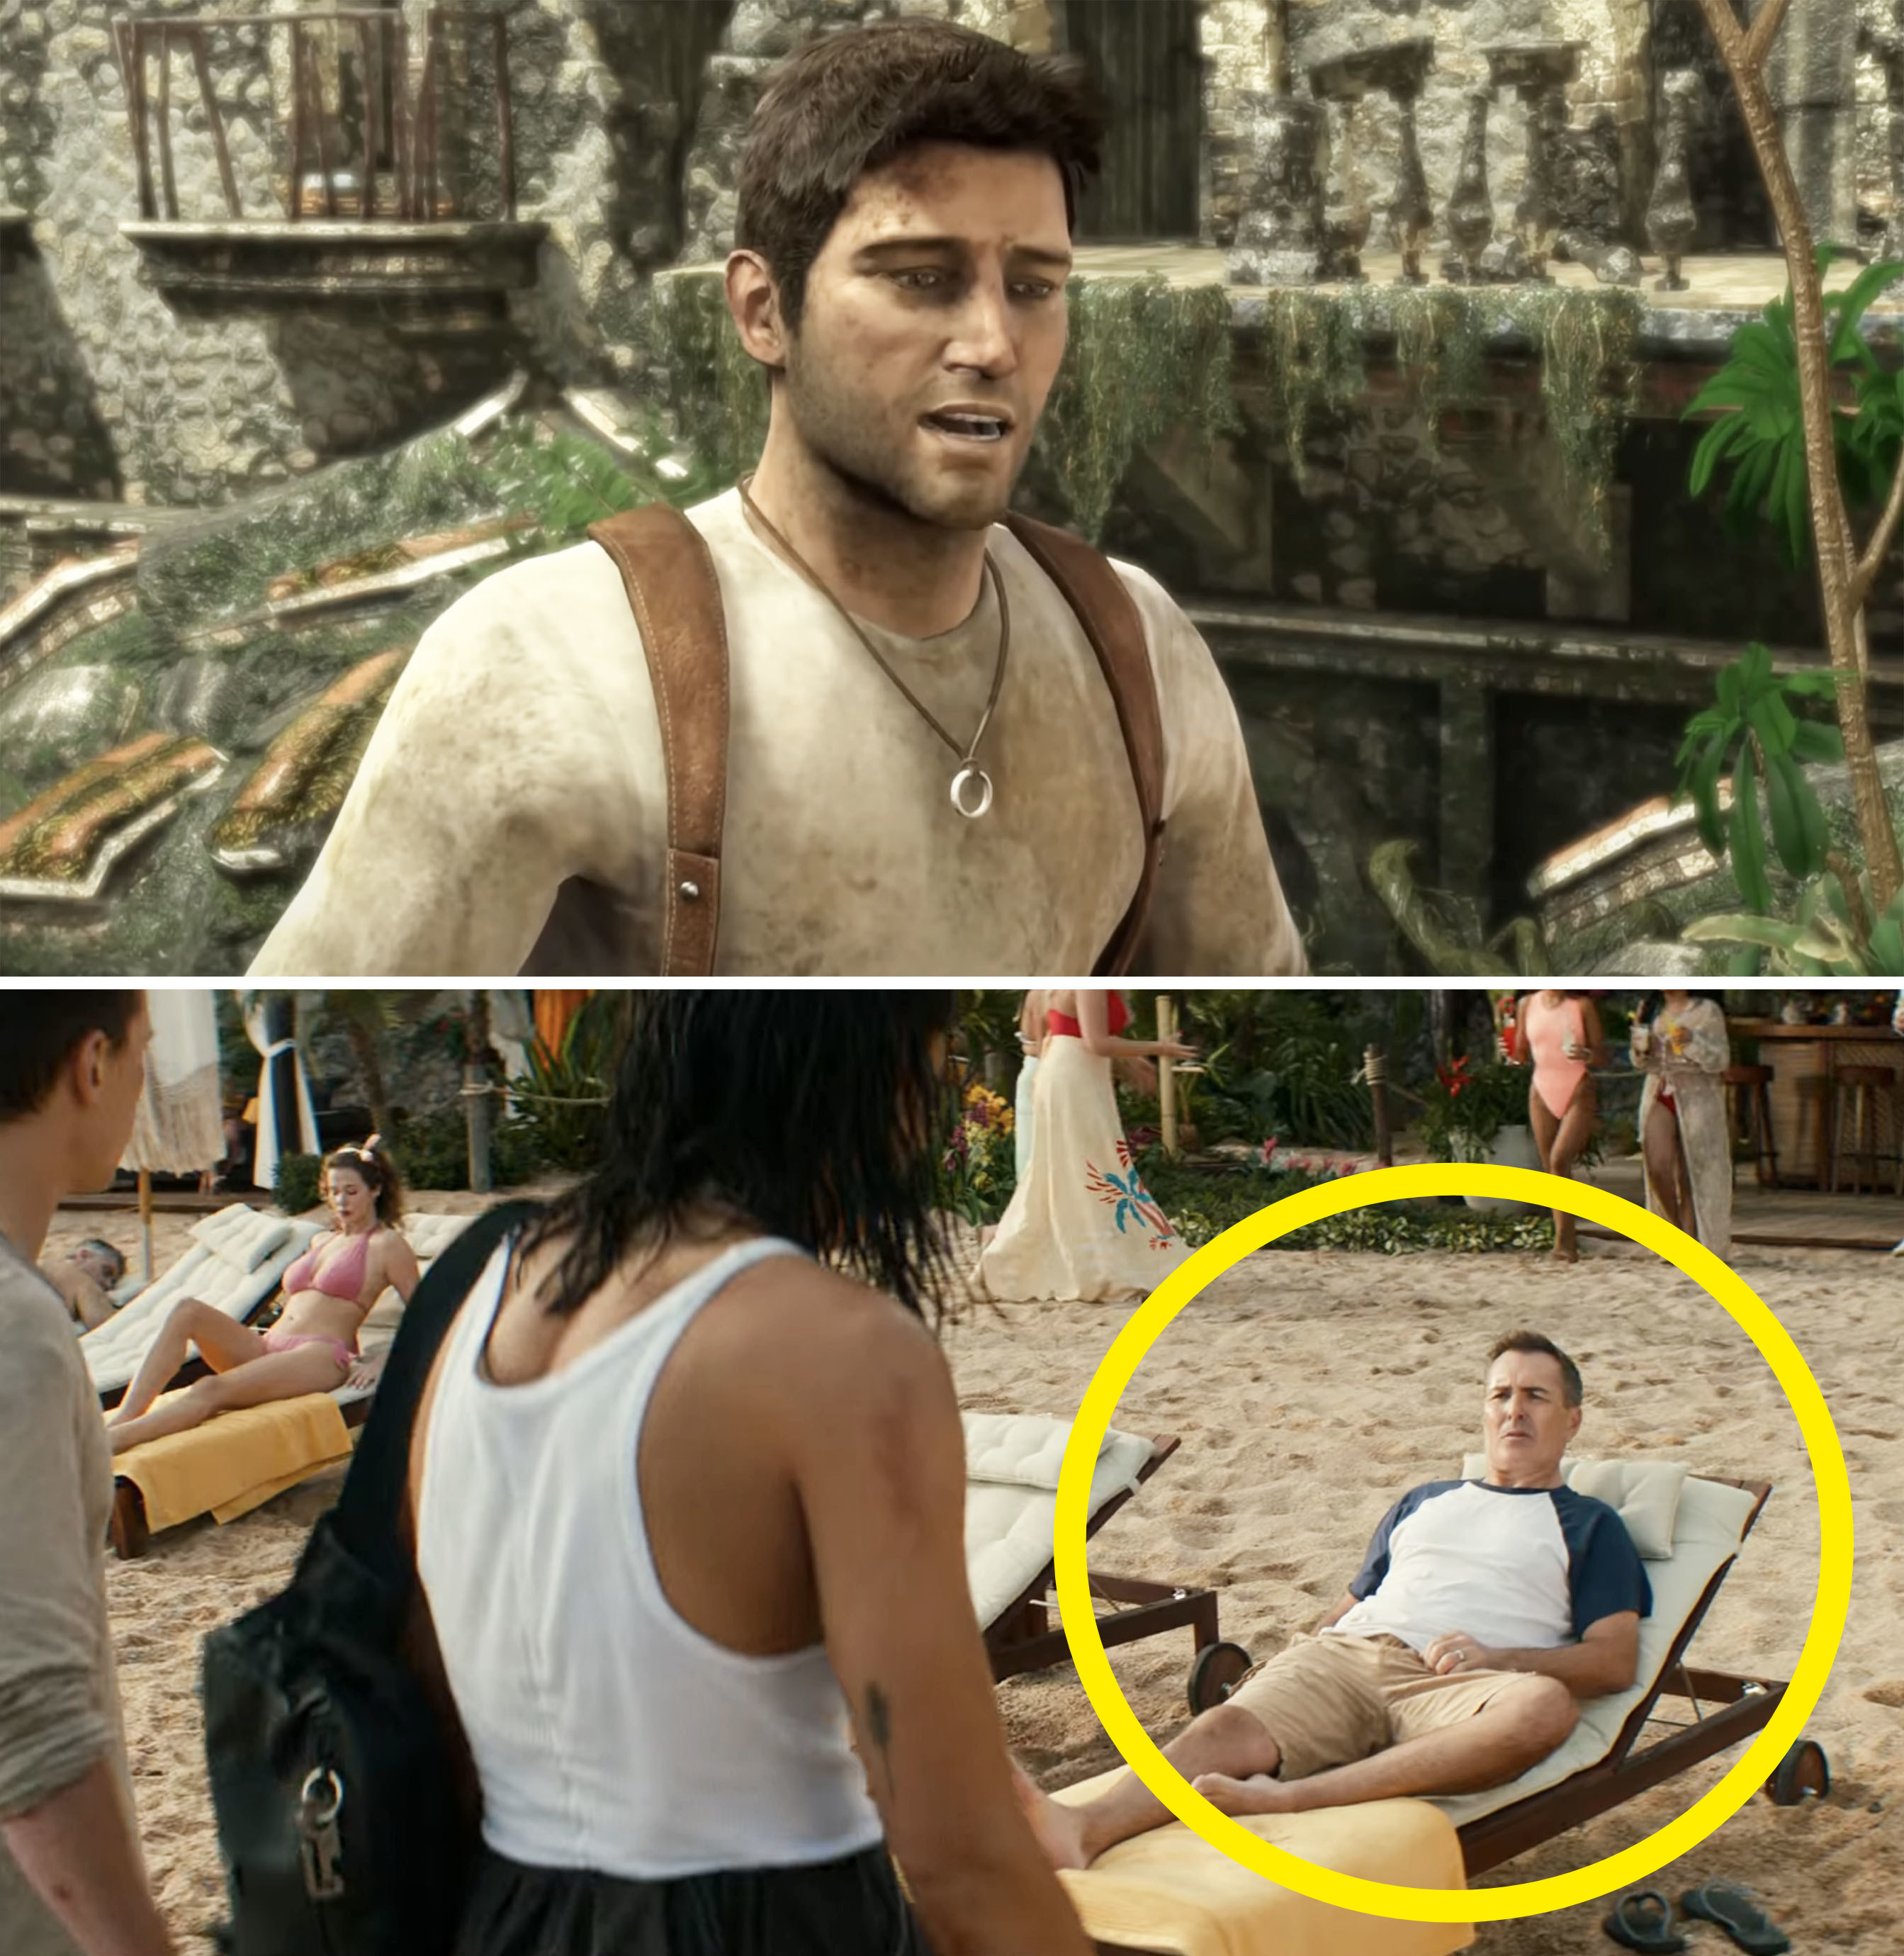 Screen grabs from &quot;Uncharted&quot;